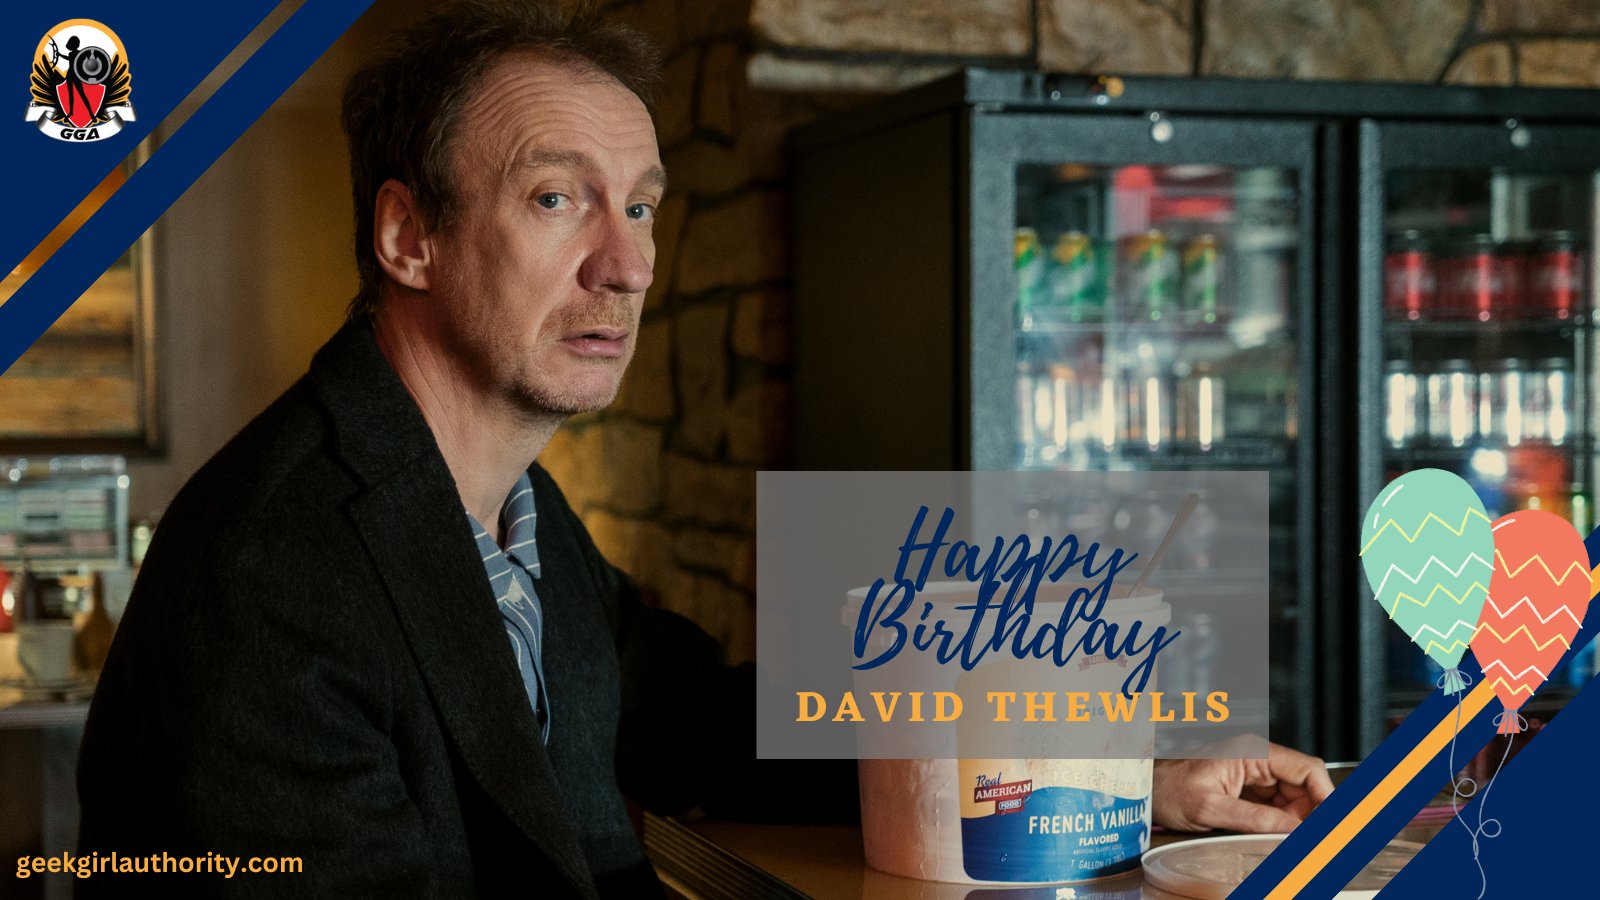 Happy Birthday, David Thewlis!  Which role of his is your favorite?  